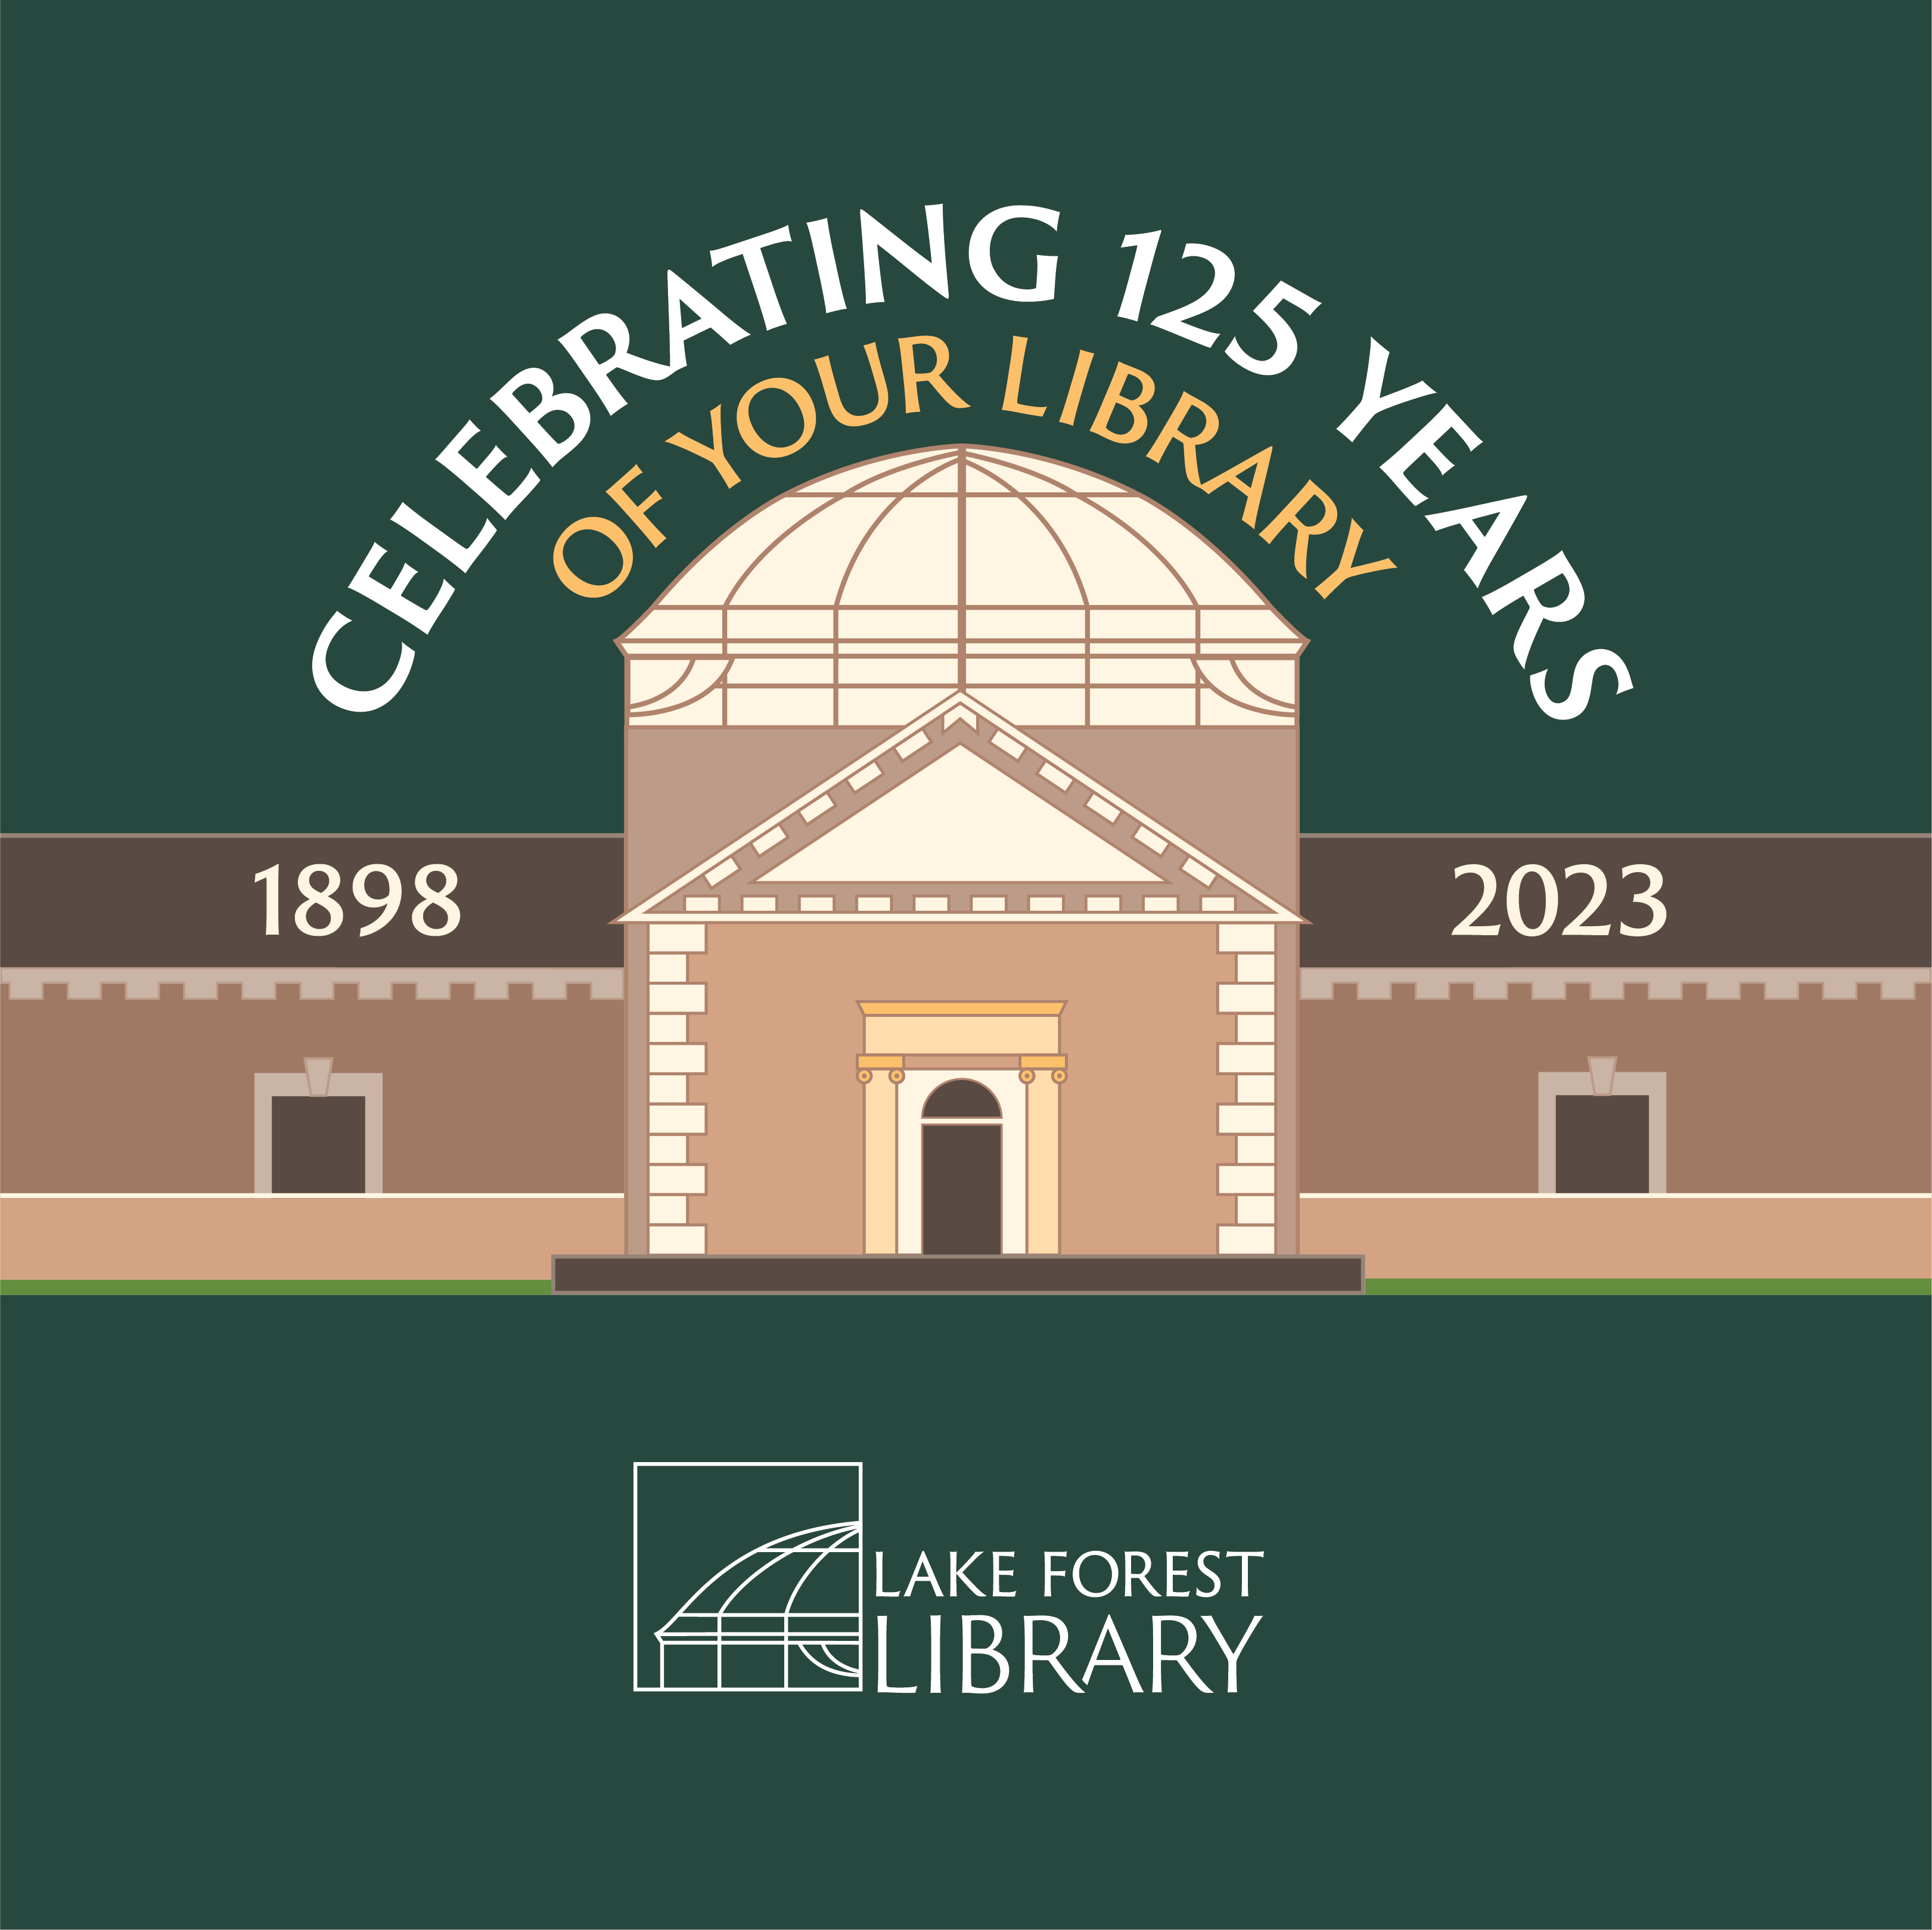 image of "Celebrating 125 Years of Your Library"